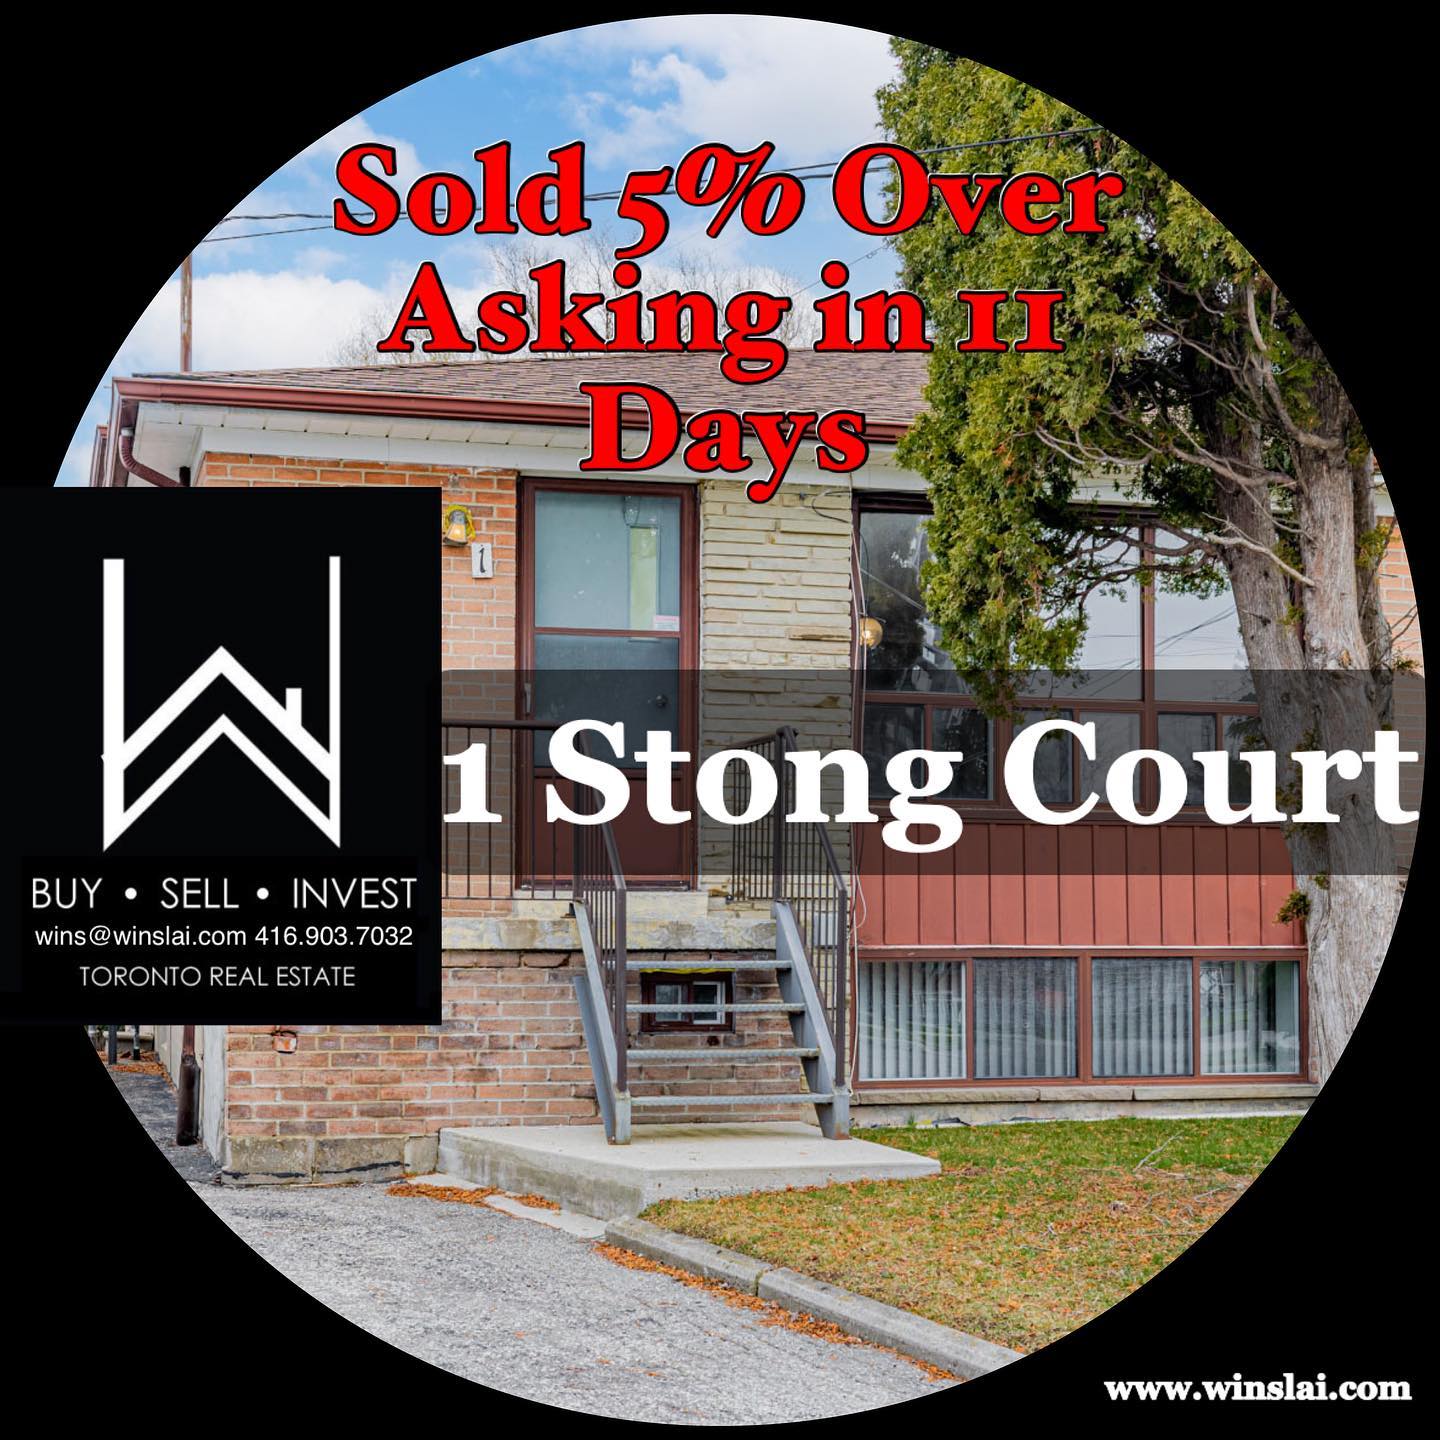 Sold 5% Over Asking in 11 Days flyer for Selling FAQs.